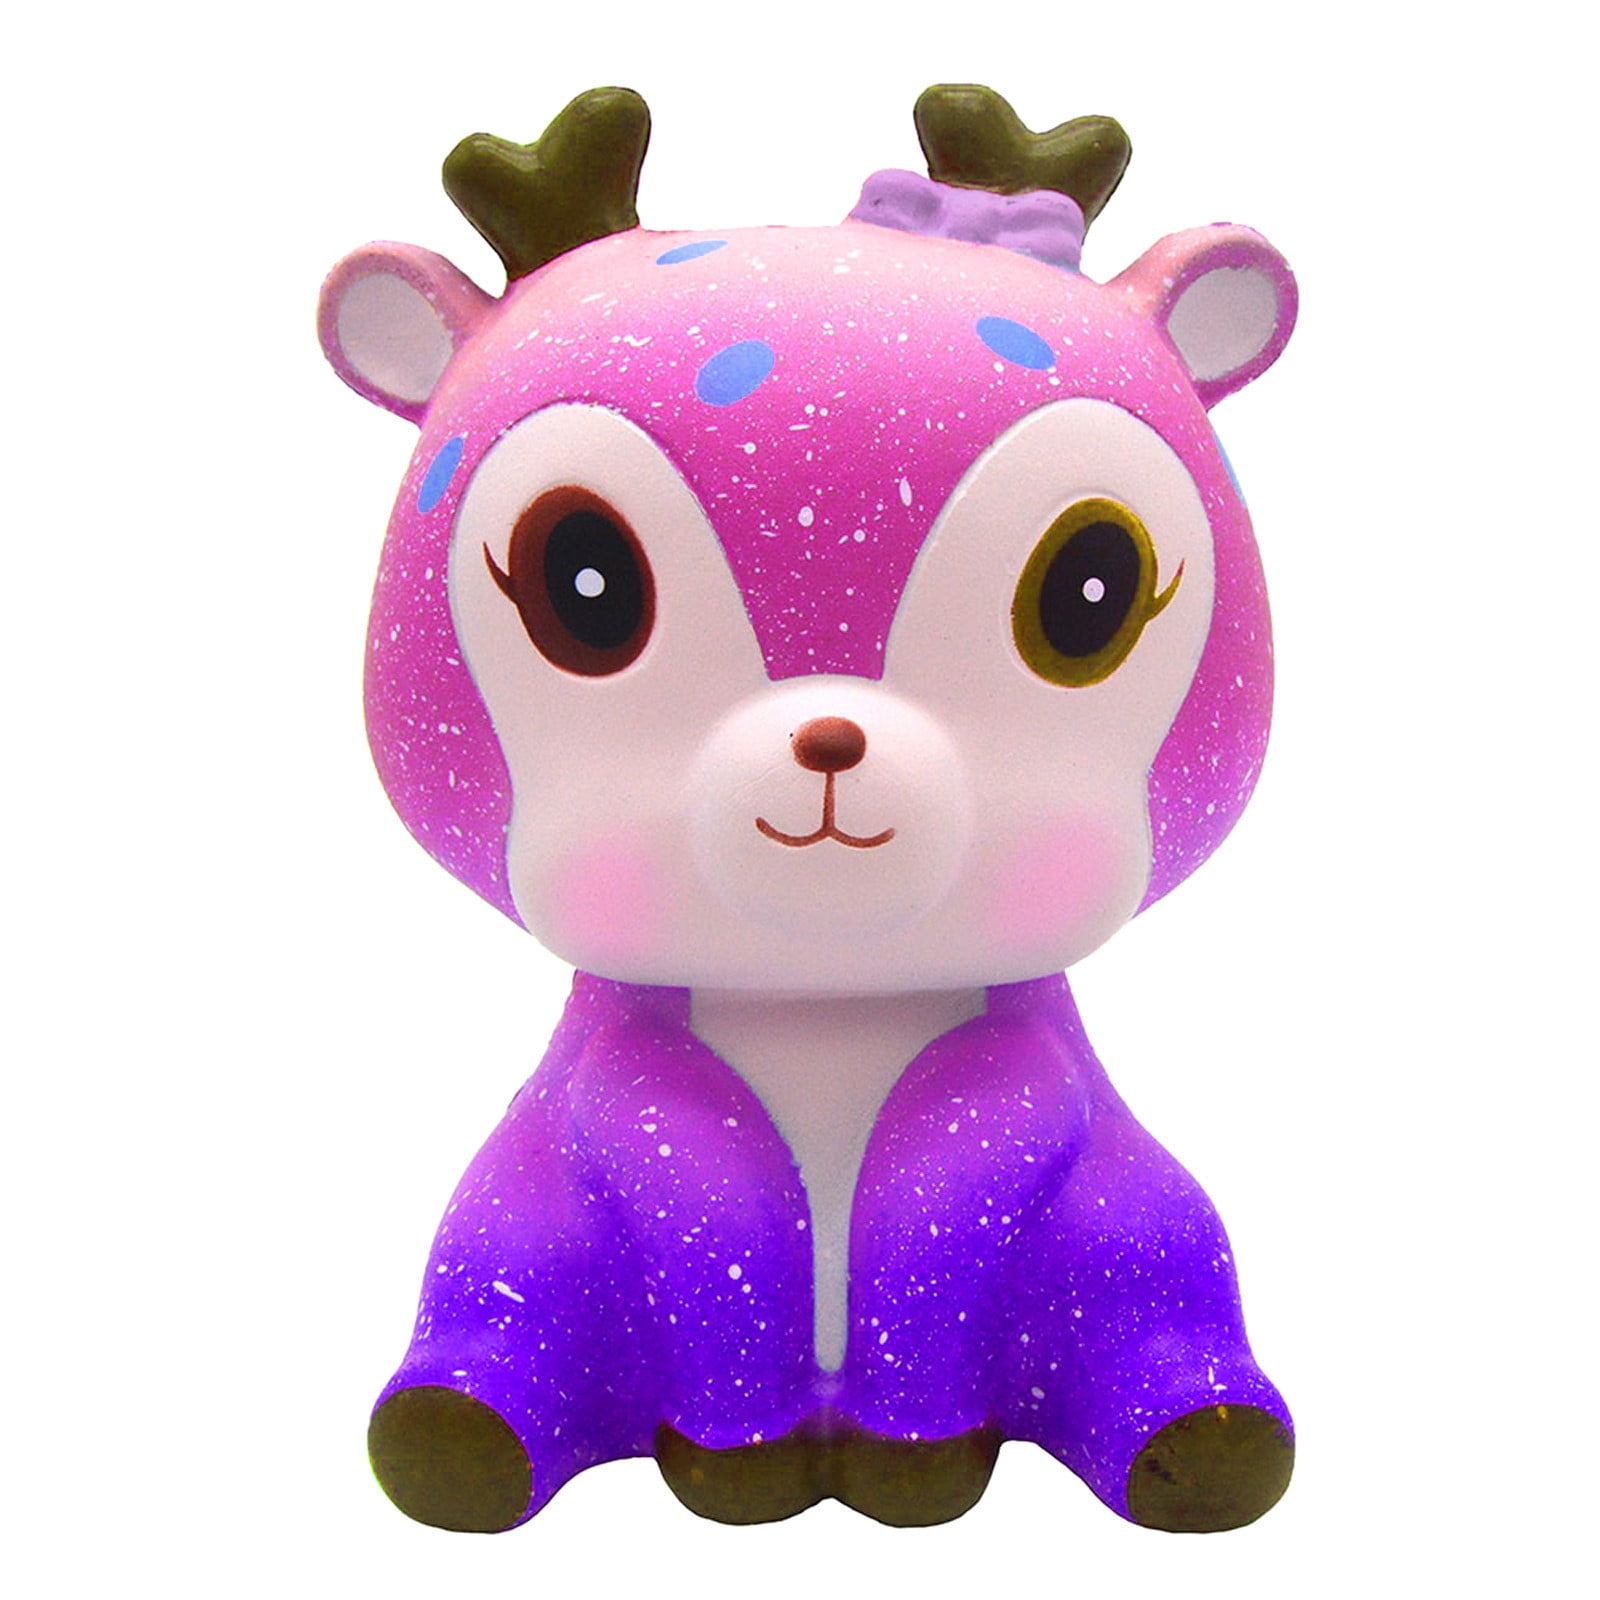 Imulation Decompression Toy Office Pressure Release Toy Kawaii Cartoon Galaxy Deer Slow Rising Cream Scented Stress Reliever Toy Onefa Fidget Toys Pink 